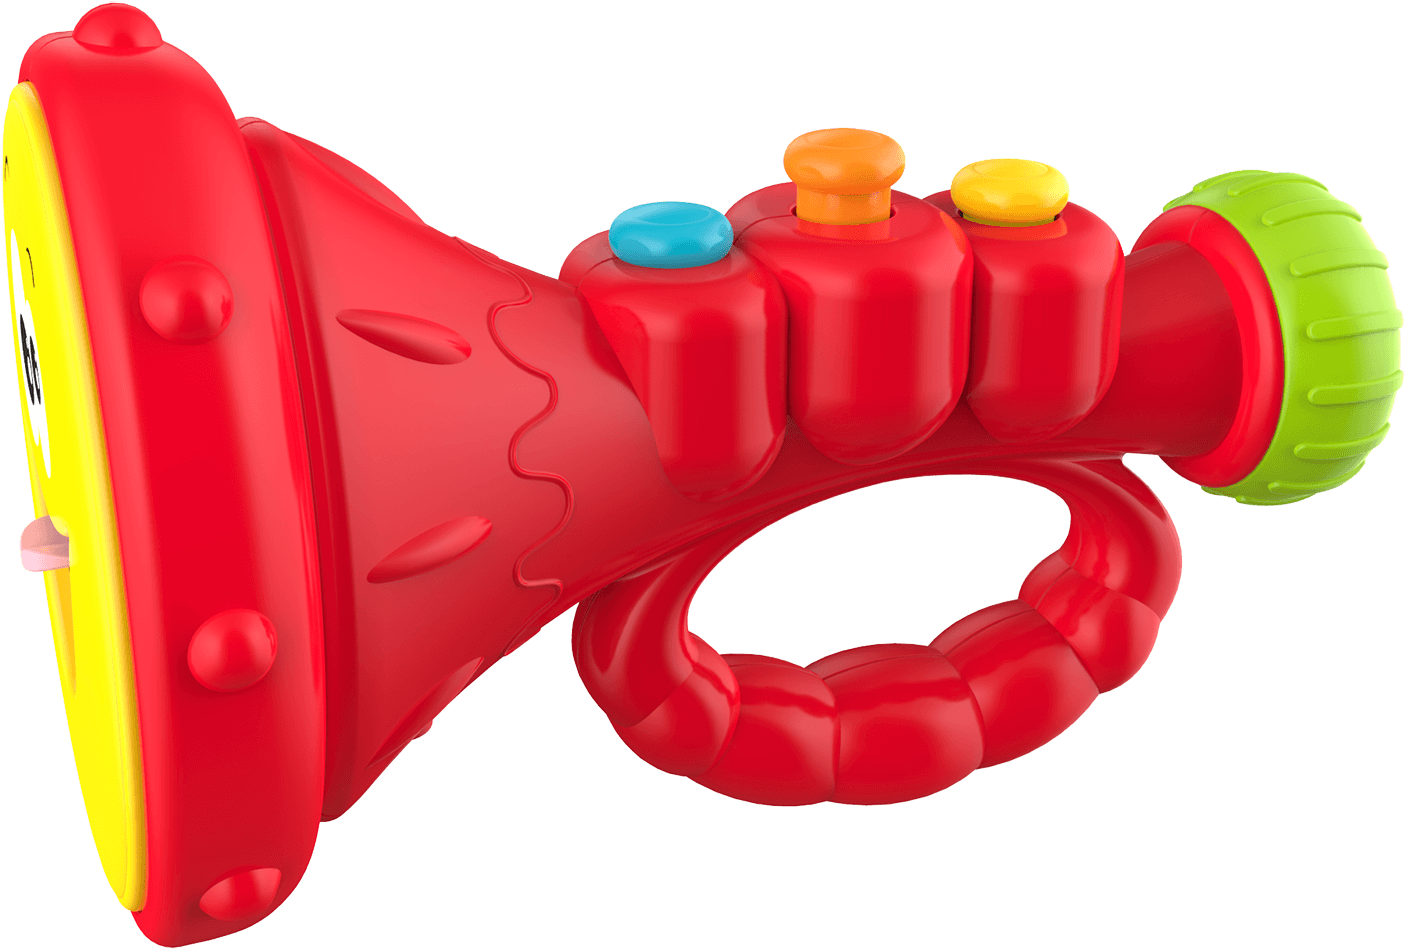 Colorful Childrens Trumpet Toy PNG image